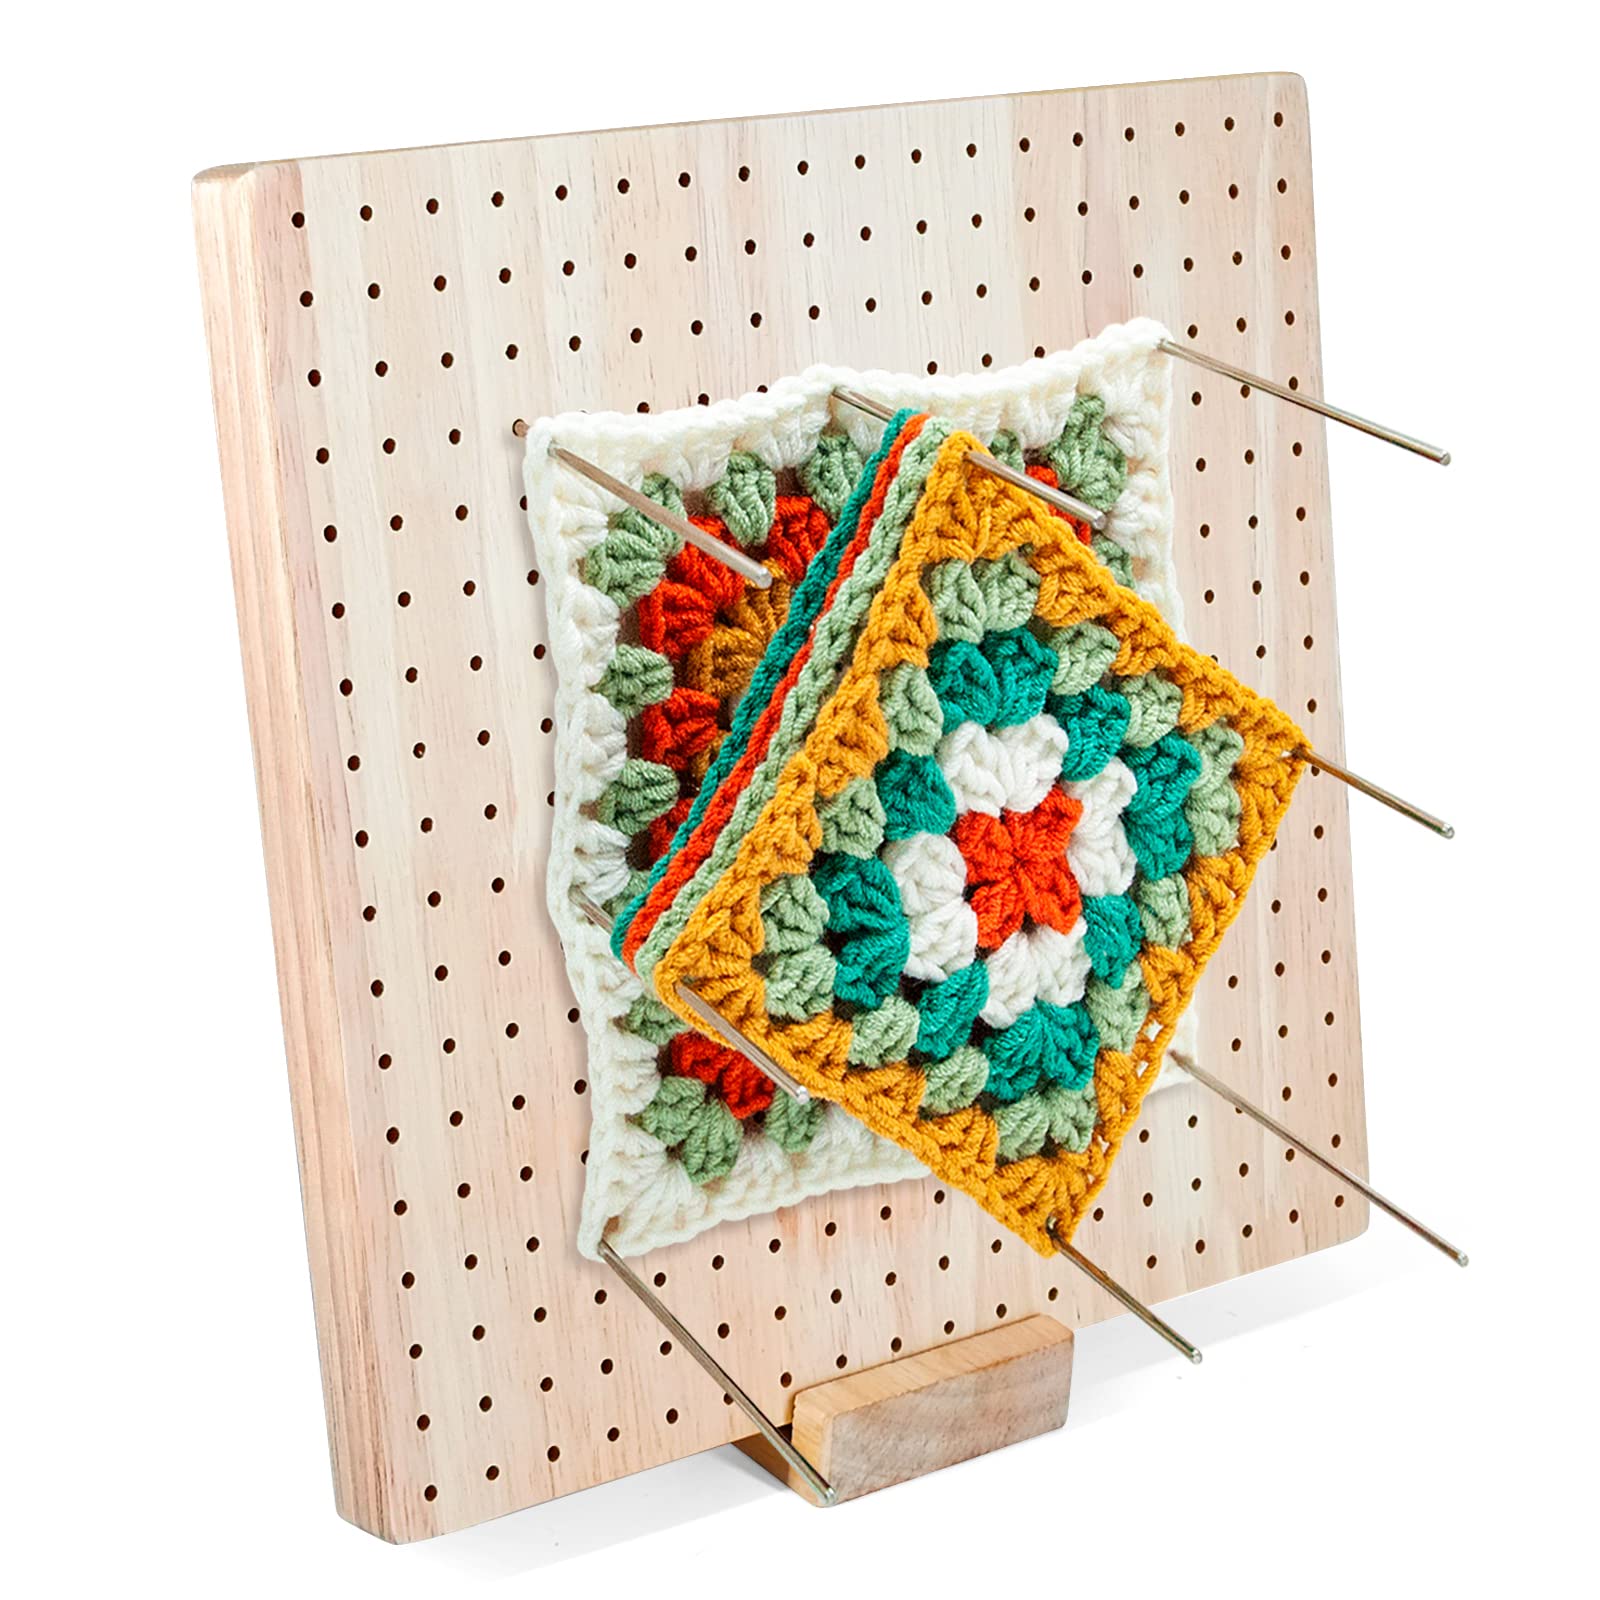 9.25 Inches Rubber Wooden Crochet Blocking Board Crochet Accessories with  20 Pcs Steel Pins for Knitting Crochet and Granny Squares Blocking Board  for Crochet Knitting and Crochet Projects Wood(9.25in)